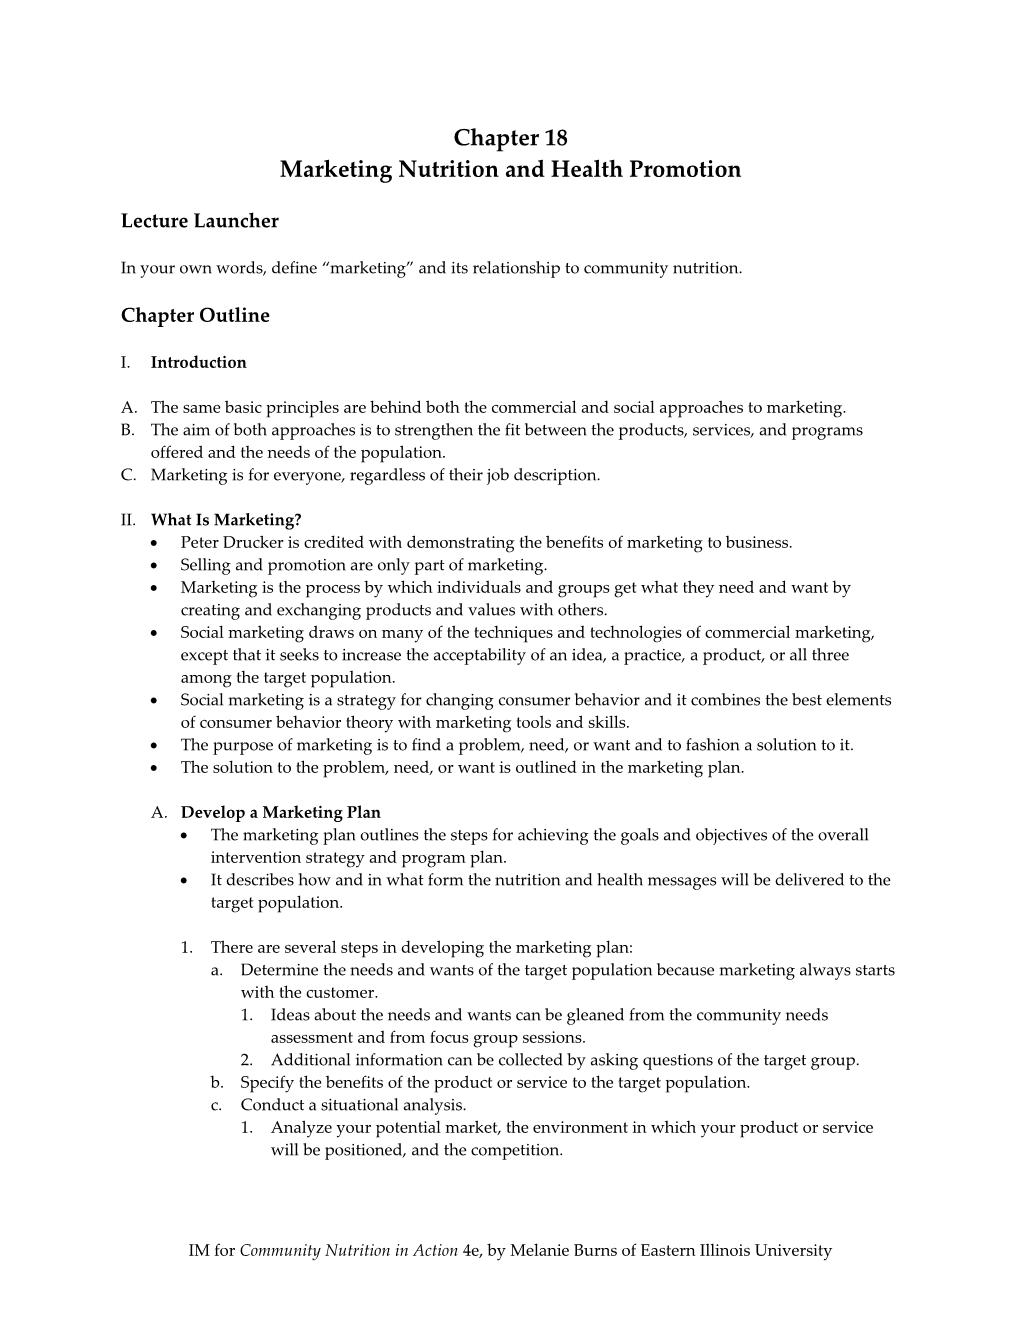 Marketing Nutrition and Health Promotion